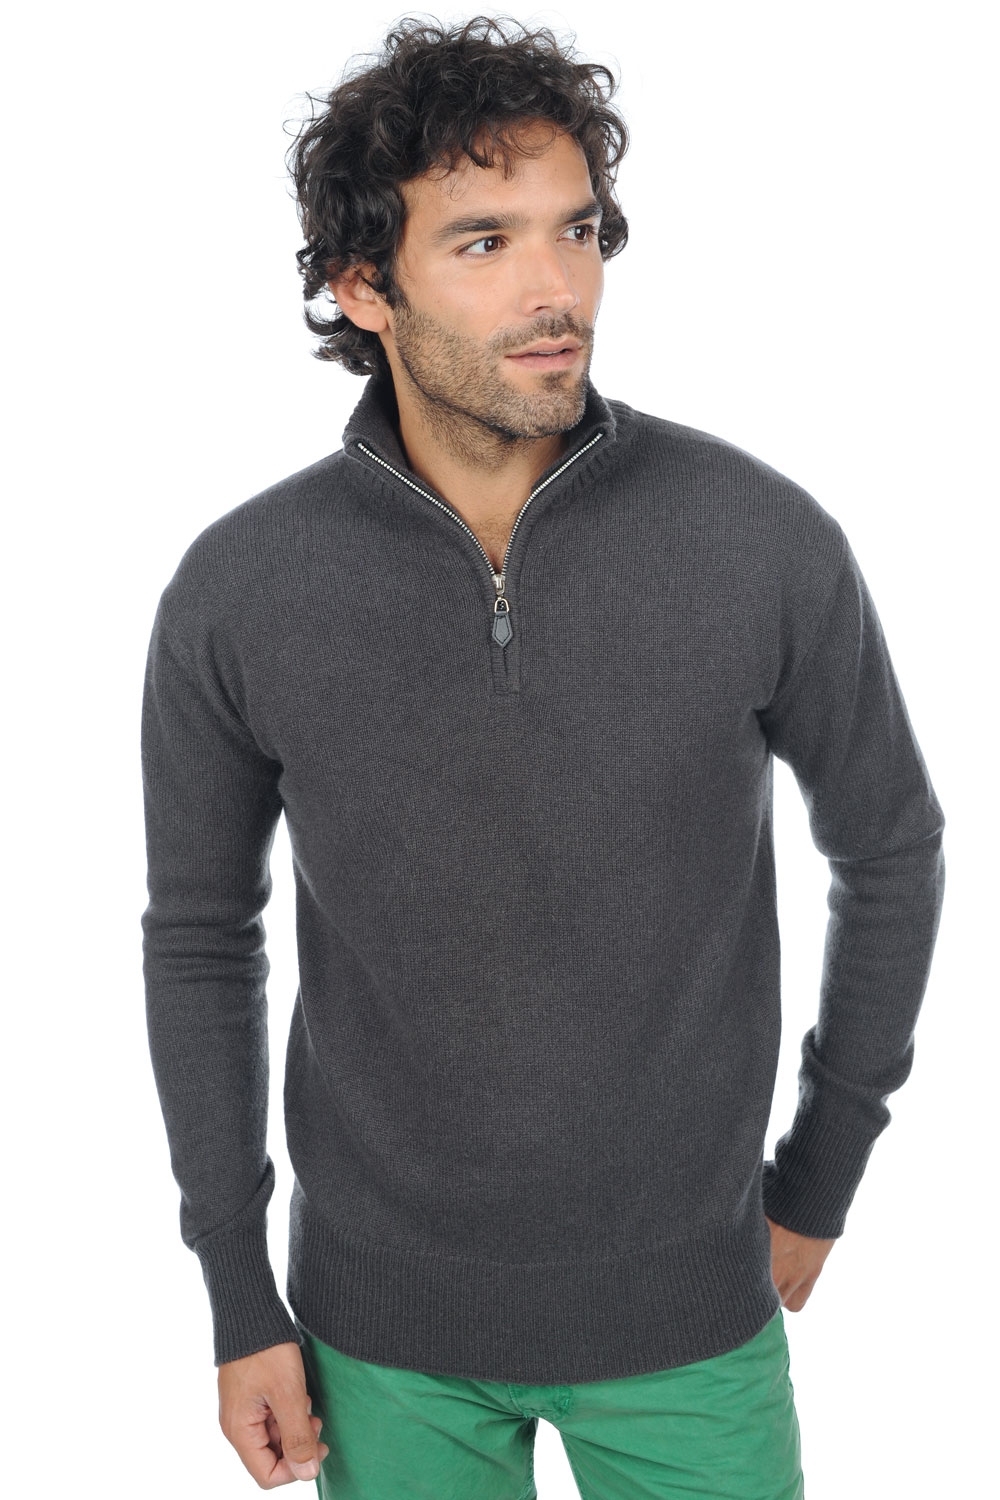 Cachemire pull homme donovan anthracite l